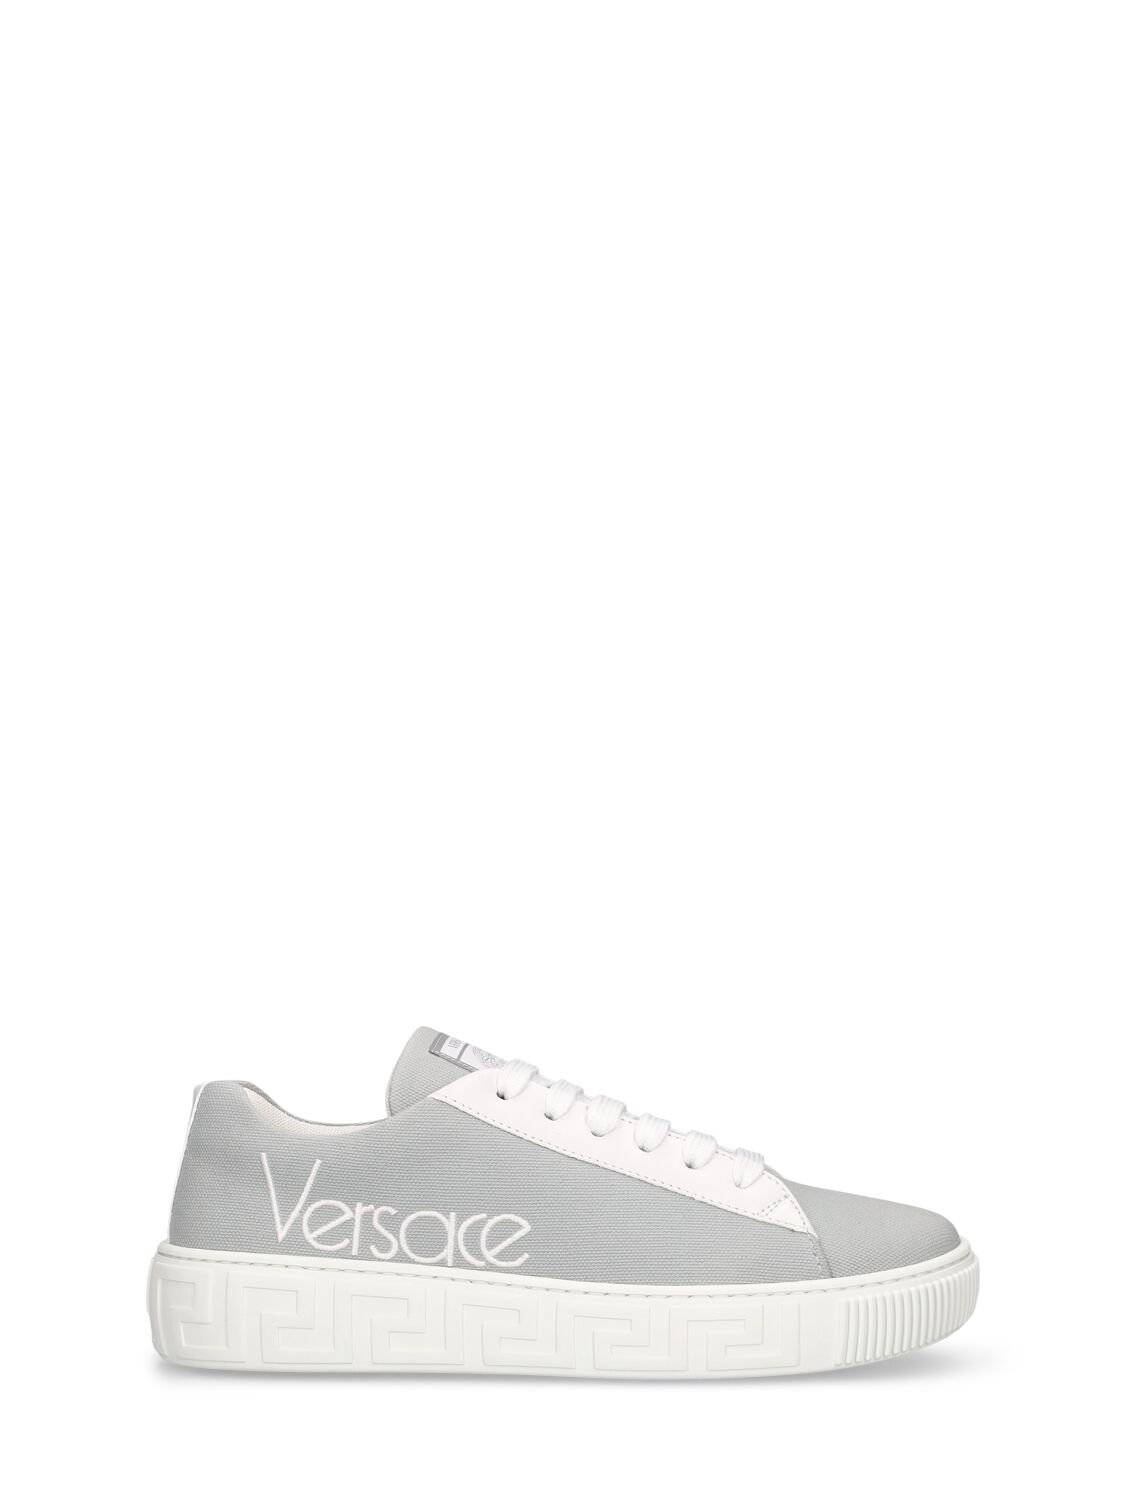 Versace Kids' Leather Lace-up Sneakers In White,grey